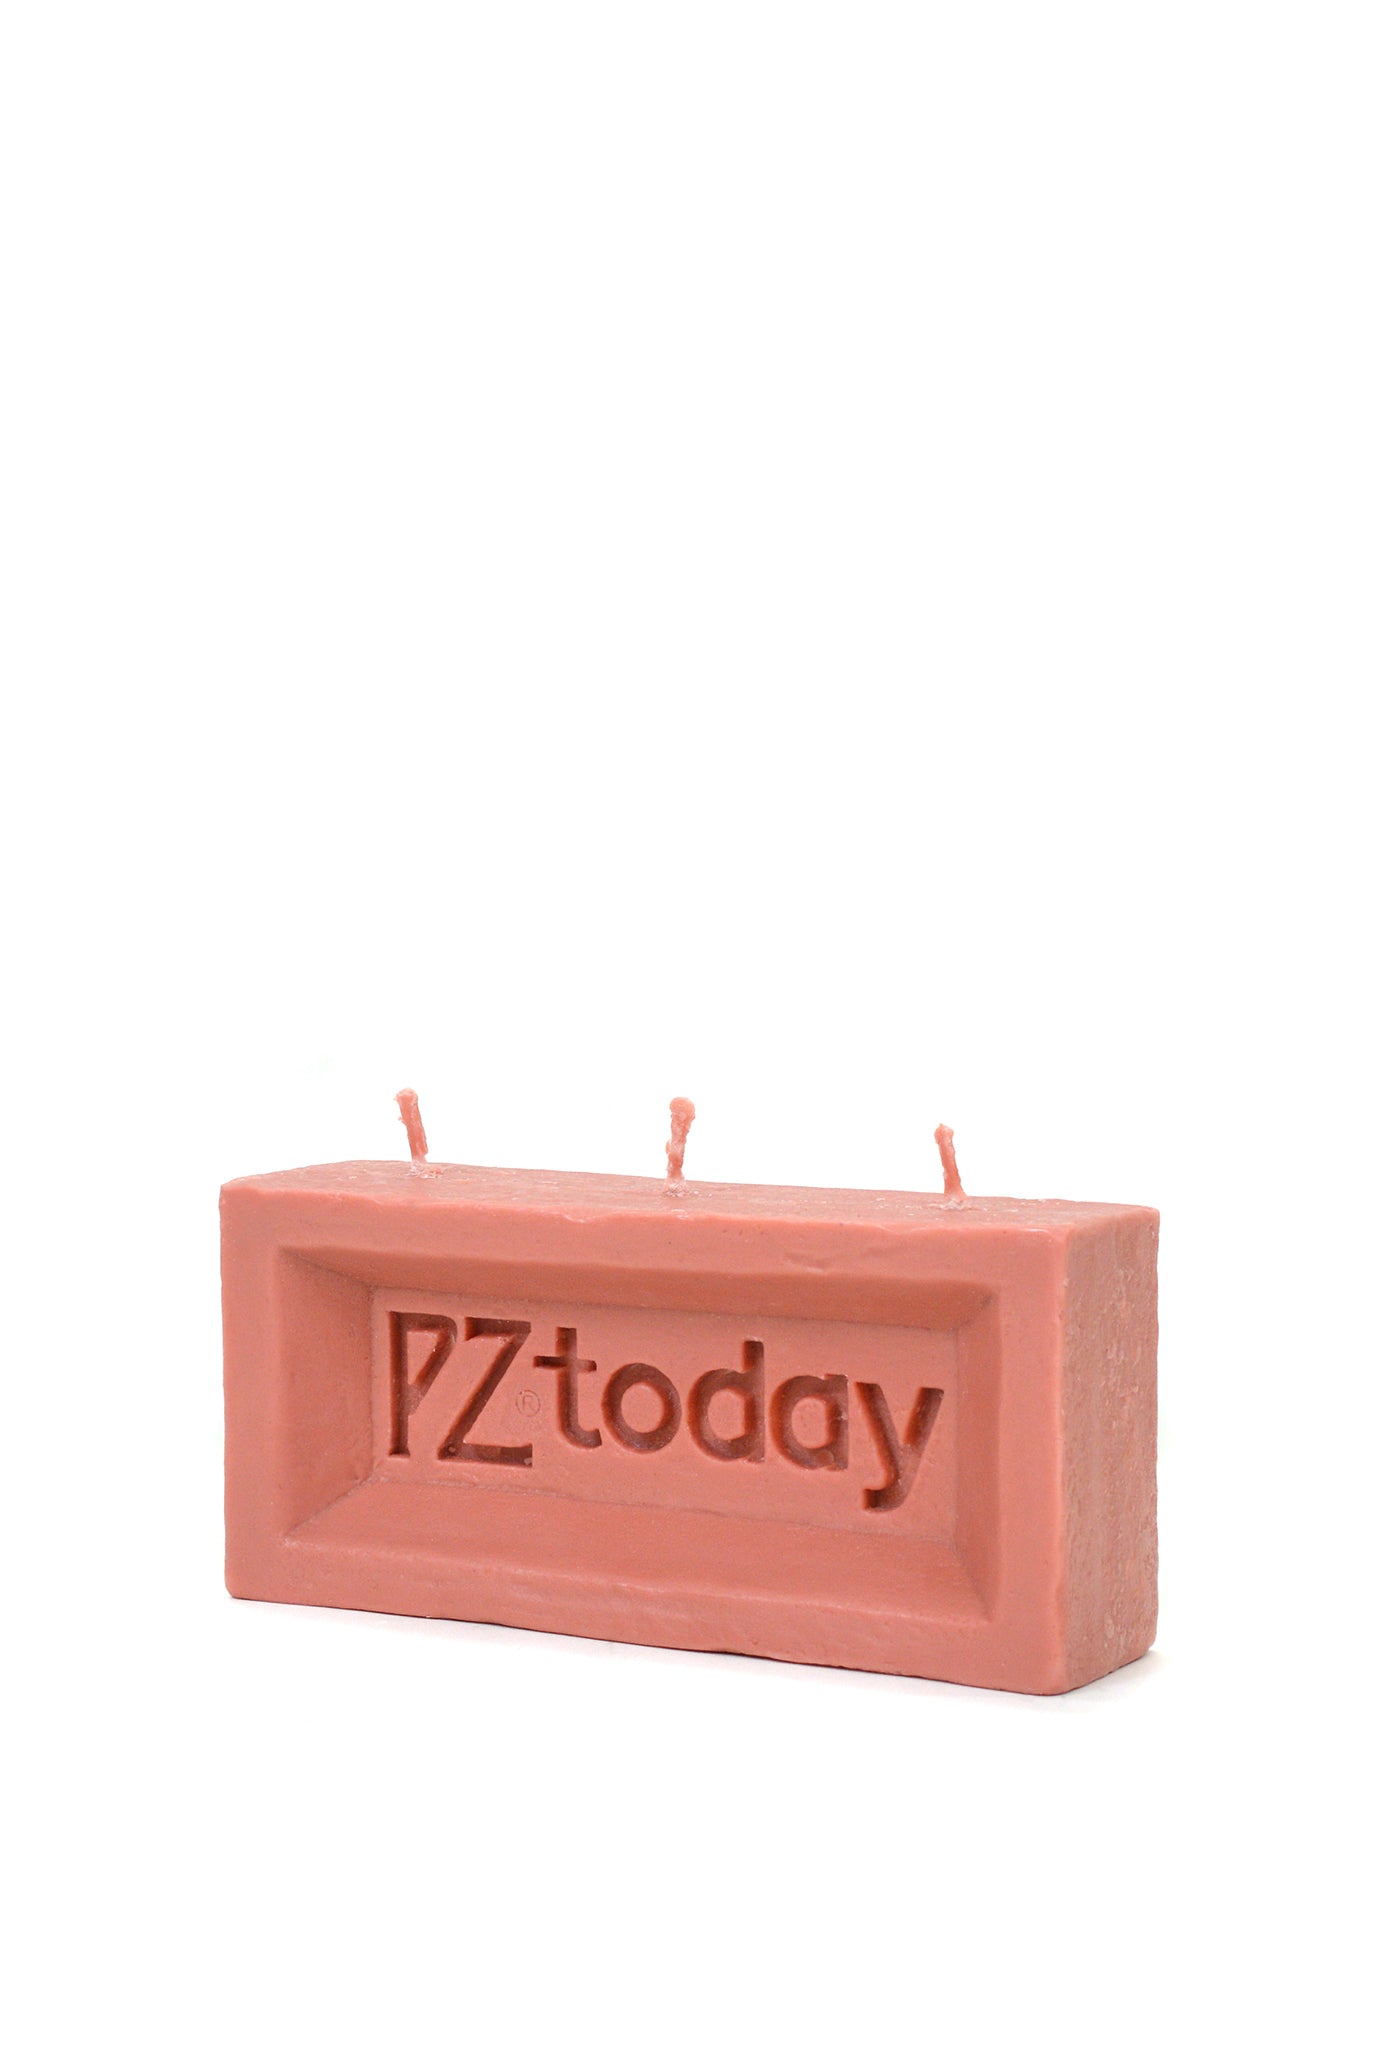 PZtoday© Brick Candle